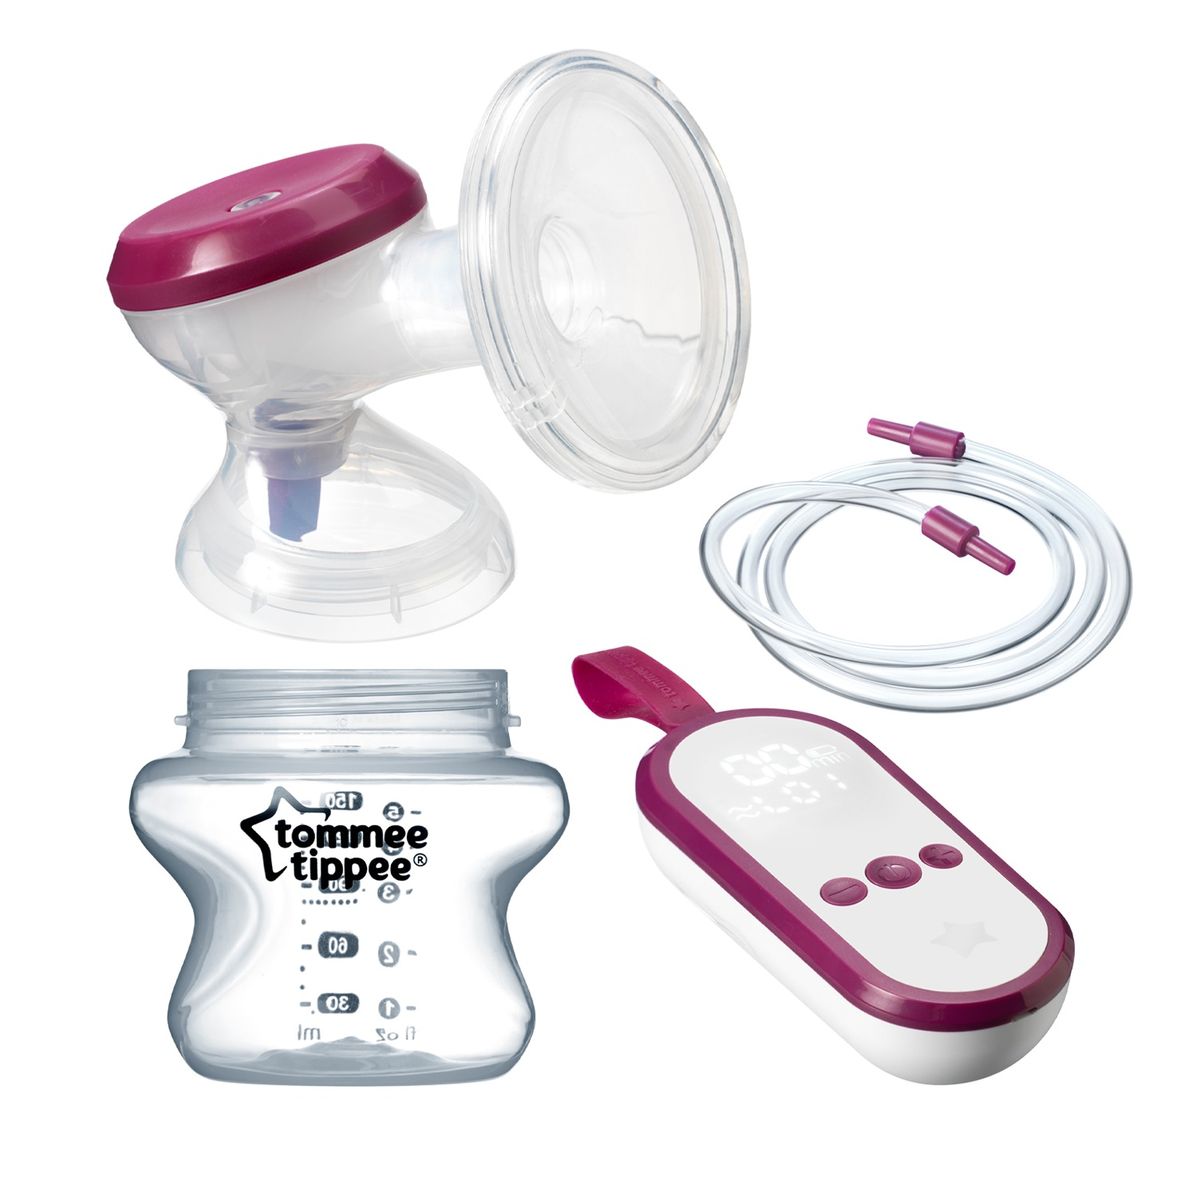 Tommee Tippee Made For Me Single Electric Breast Pump Shop Today Get It Tomorrow